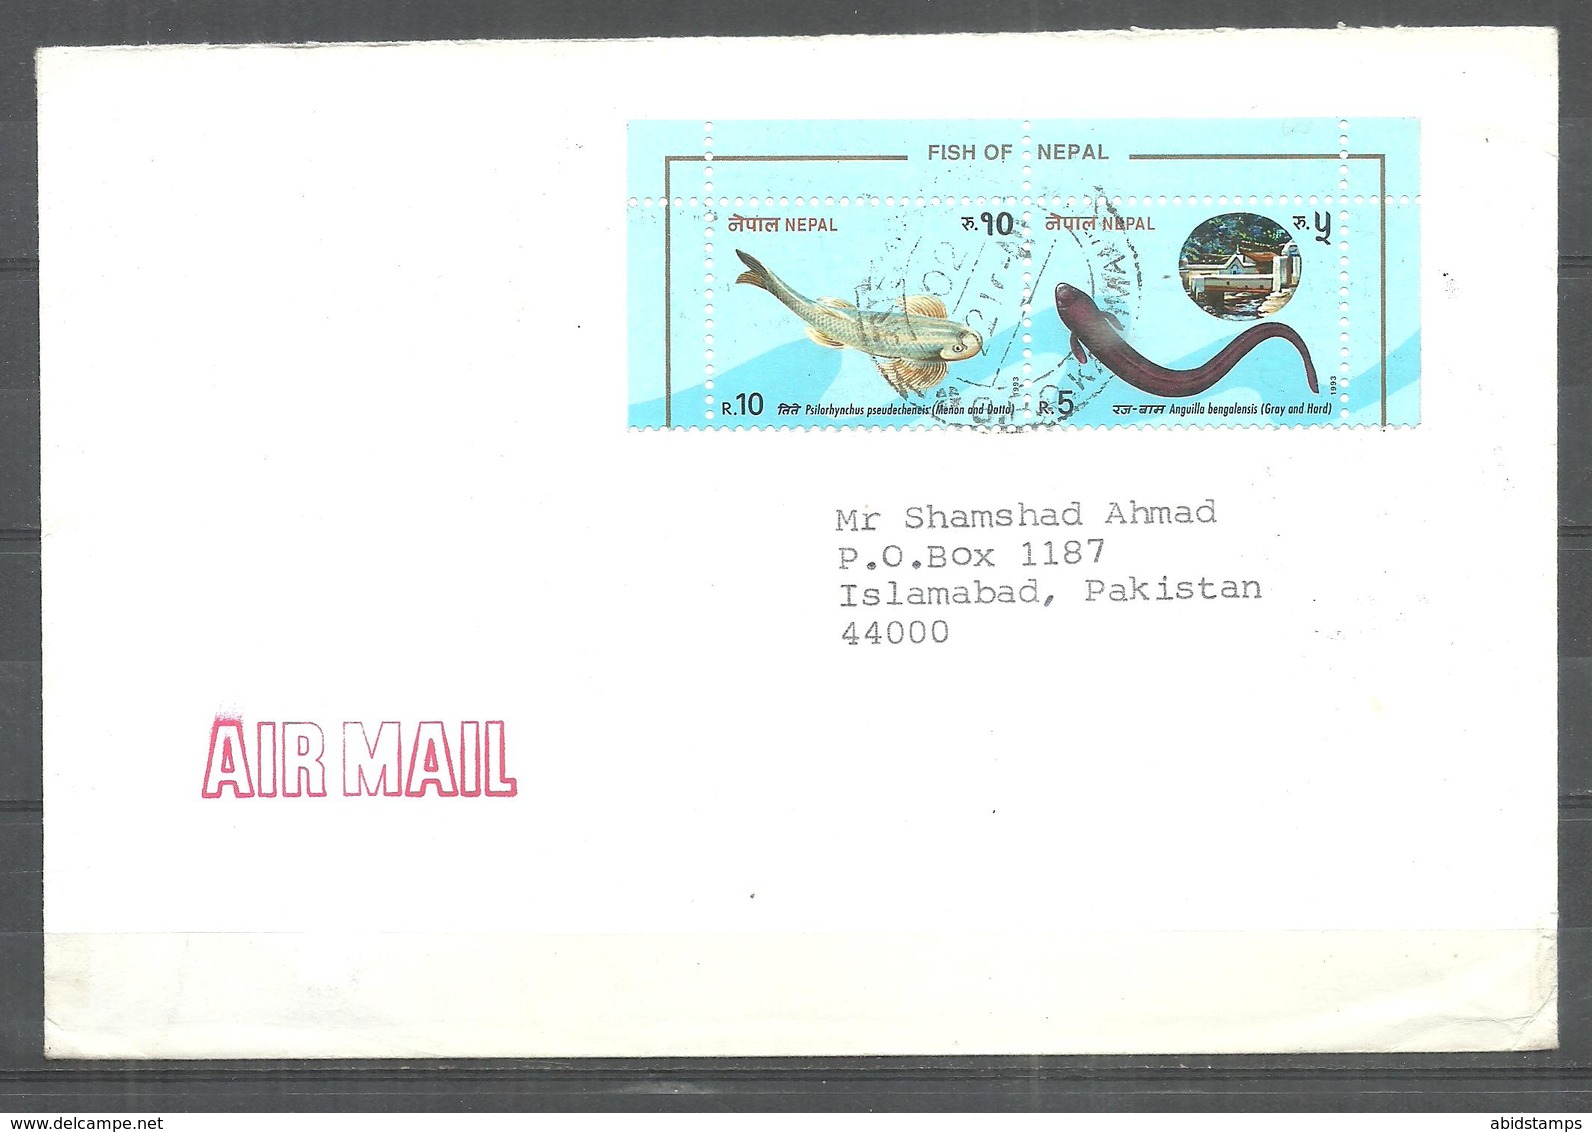 USED AIR MAIL COVER NEPAL TO PAKISTAN FISHES - Nepal